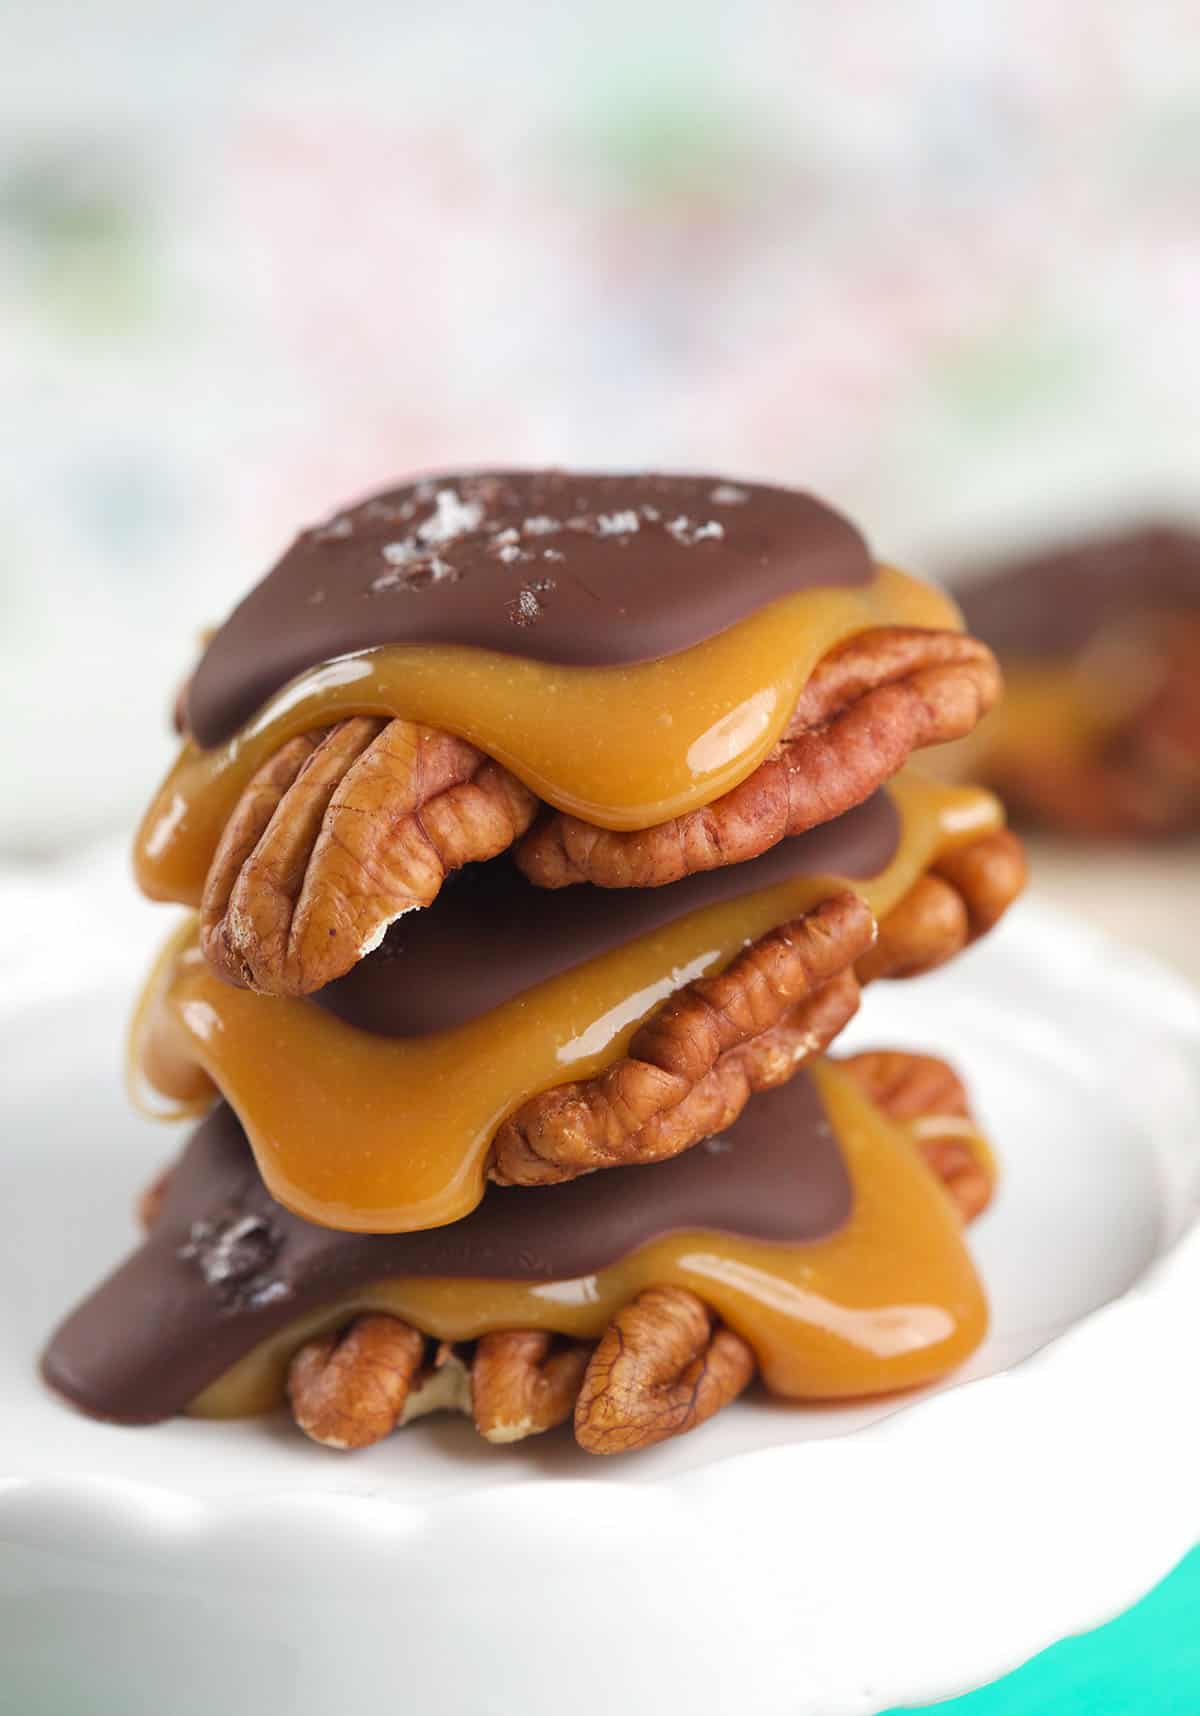 Three chocolate turtles are stacked on a white plate.